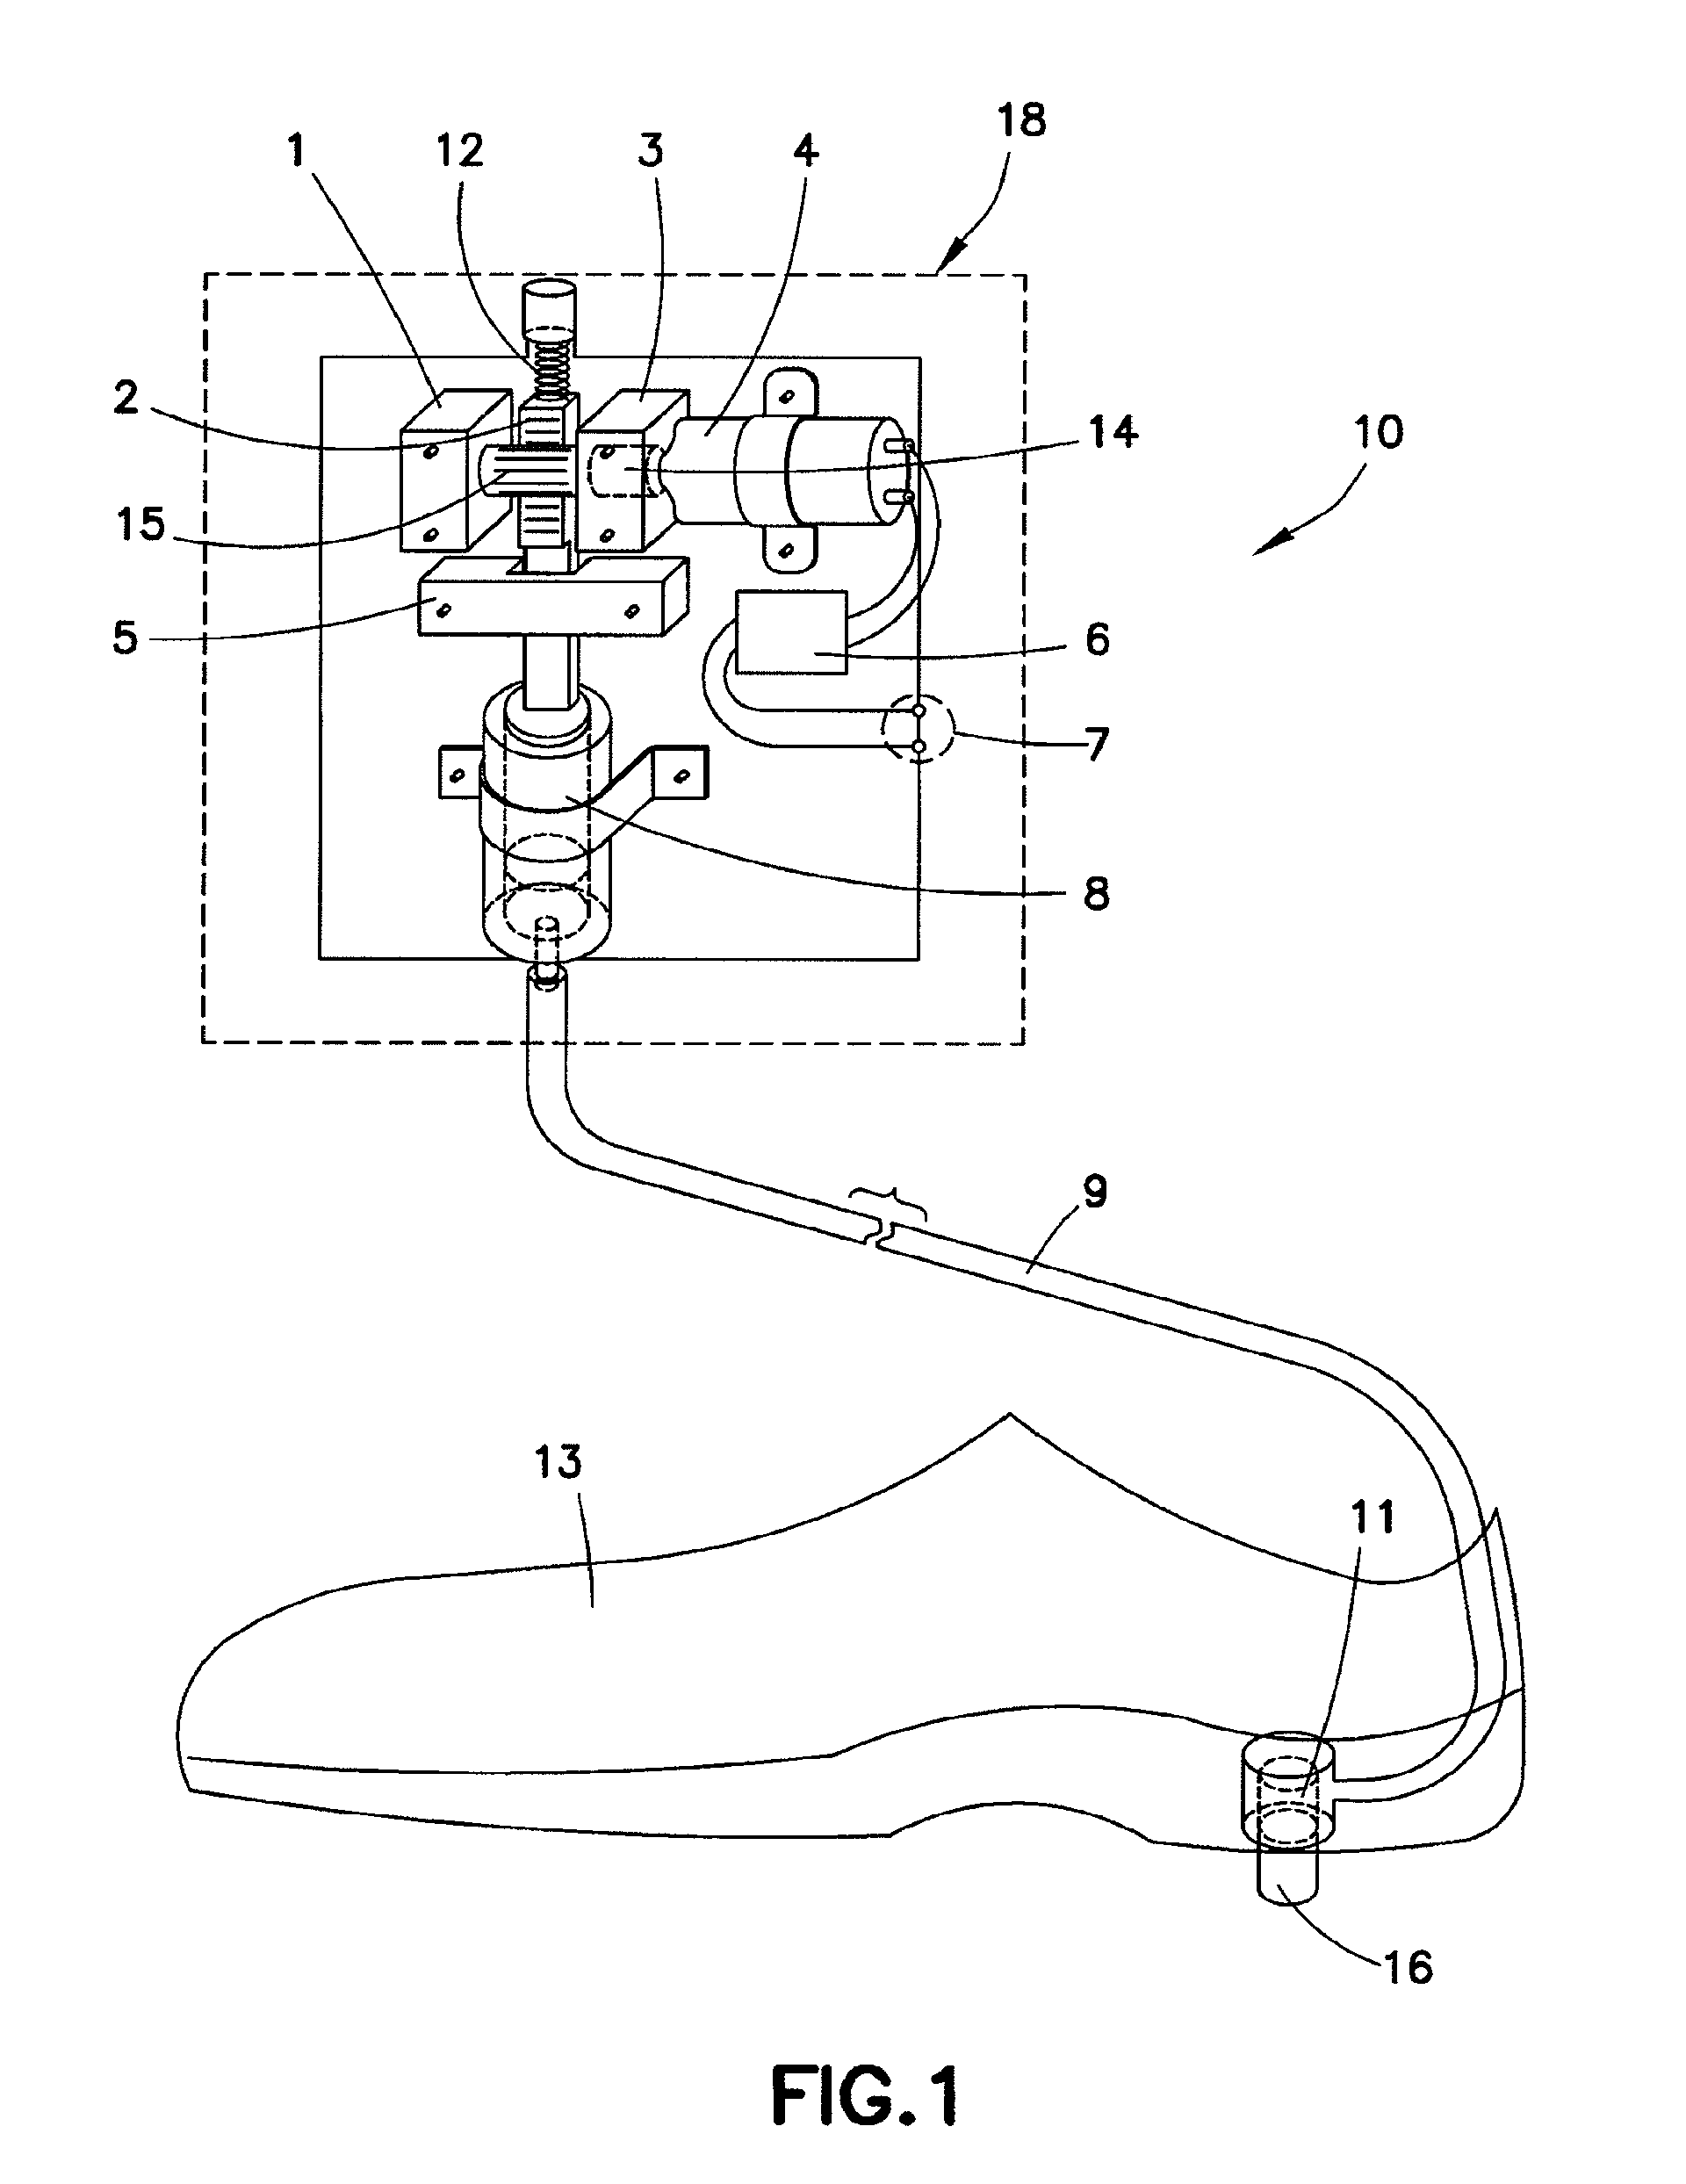 Method and apparatus for generating electricity while a user is moving